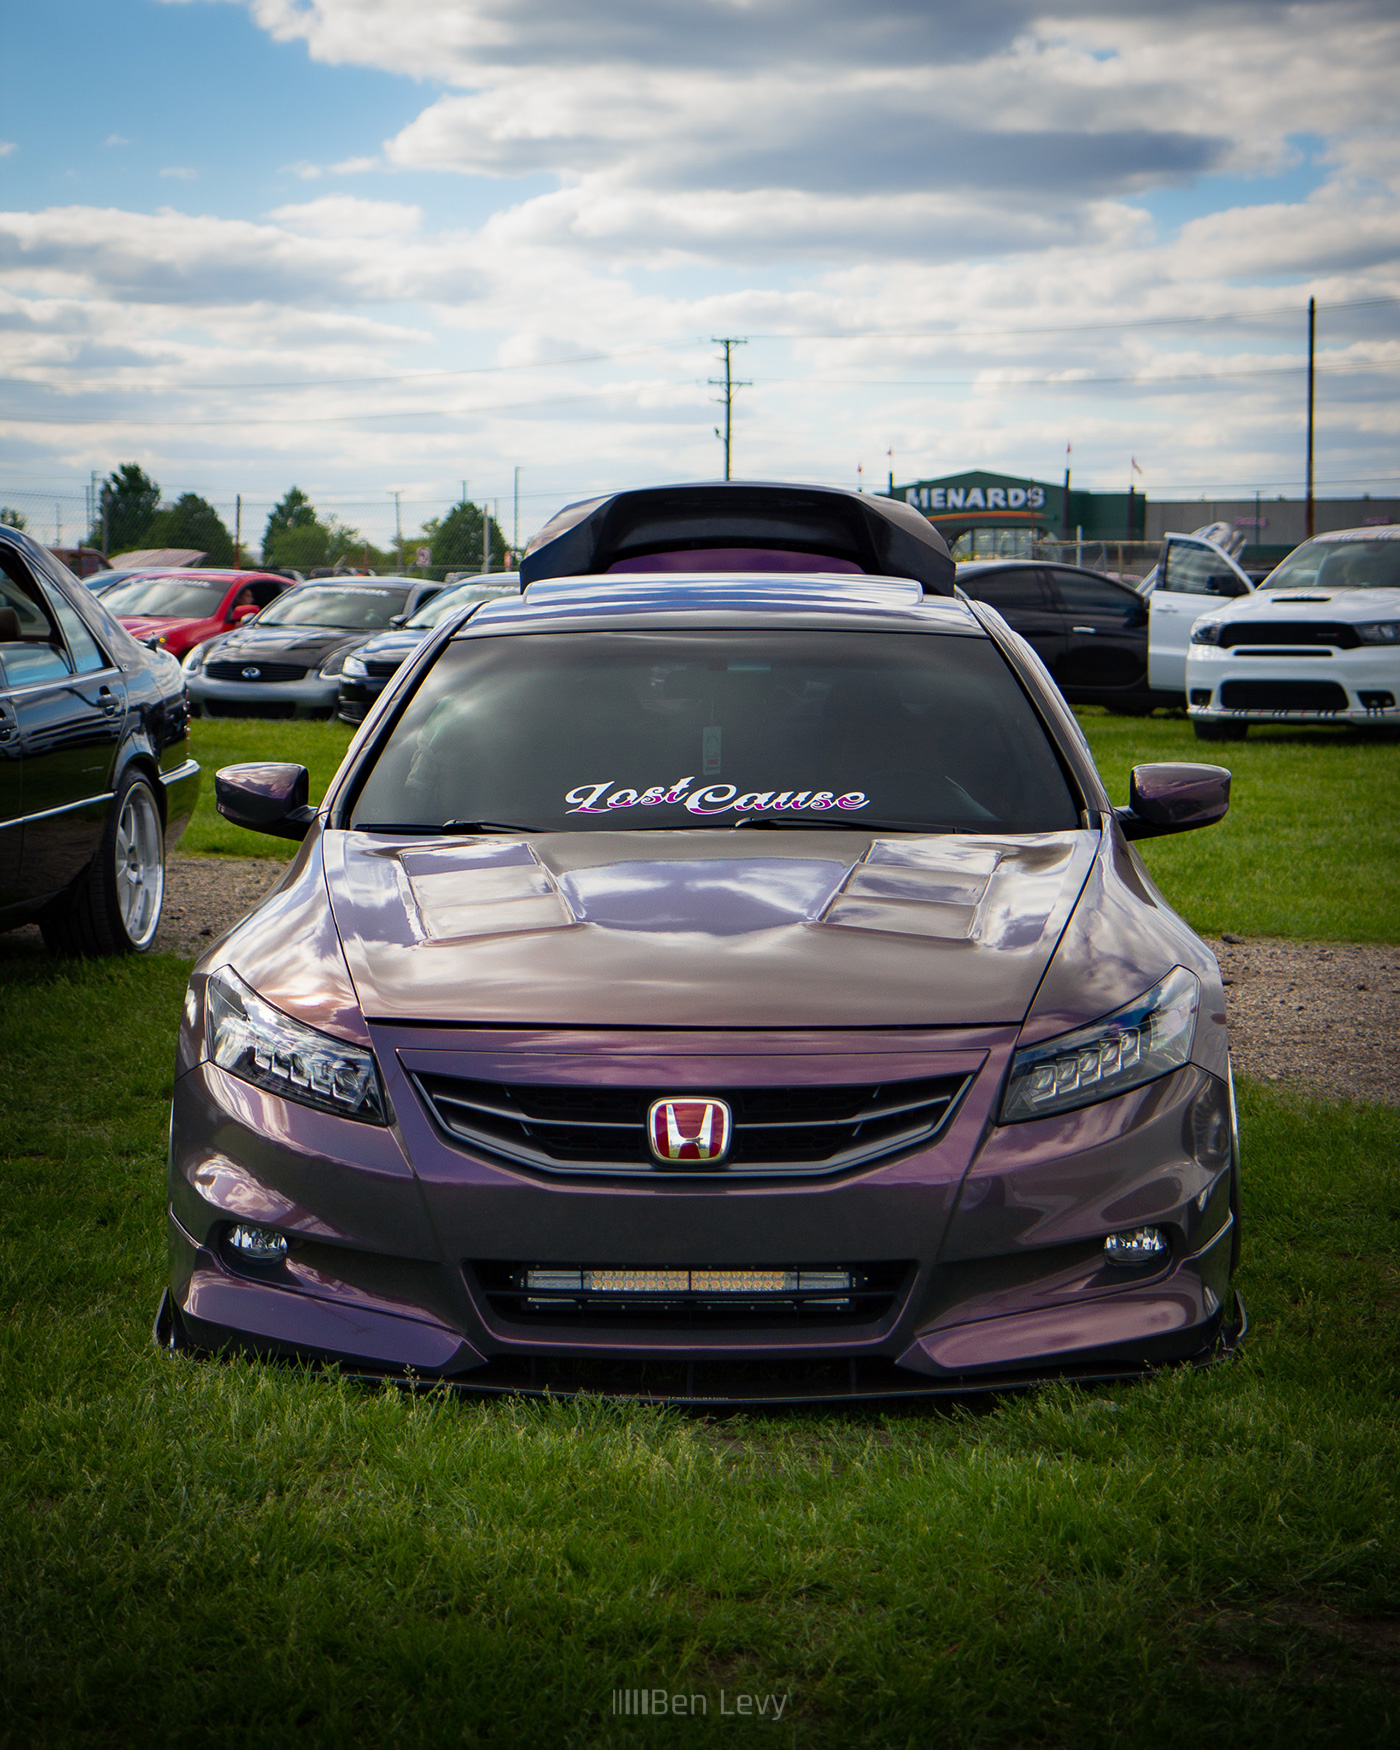 Front of Bagged Accord Coupe at Import Face-Off